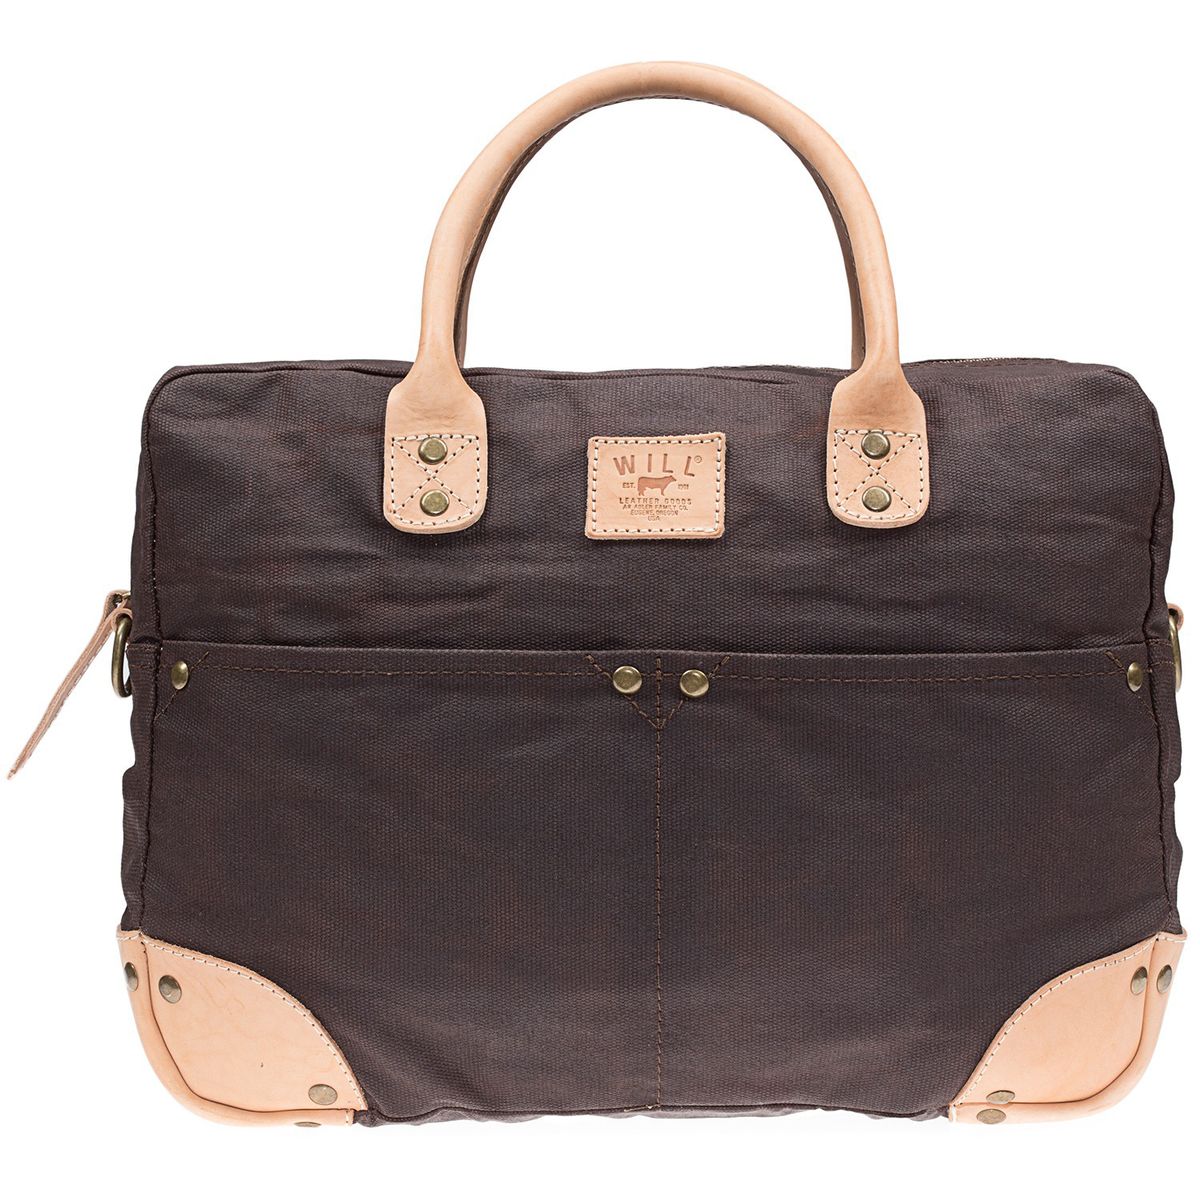 Will Leather Goods Wax Coated Canvas Flight Bag - Accessories